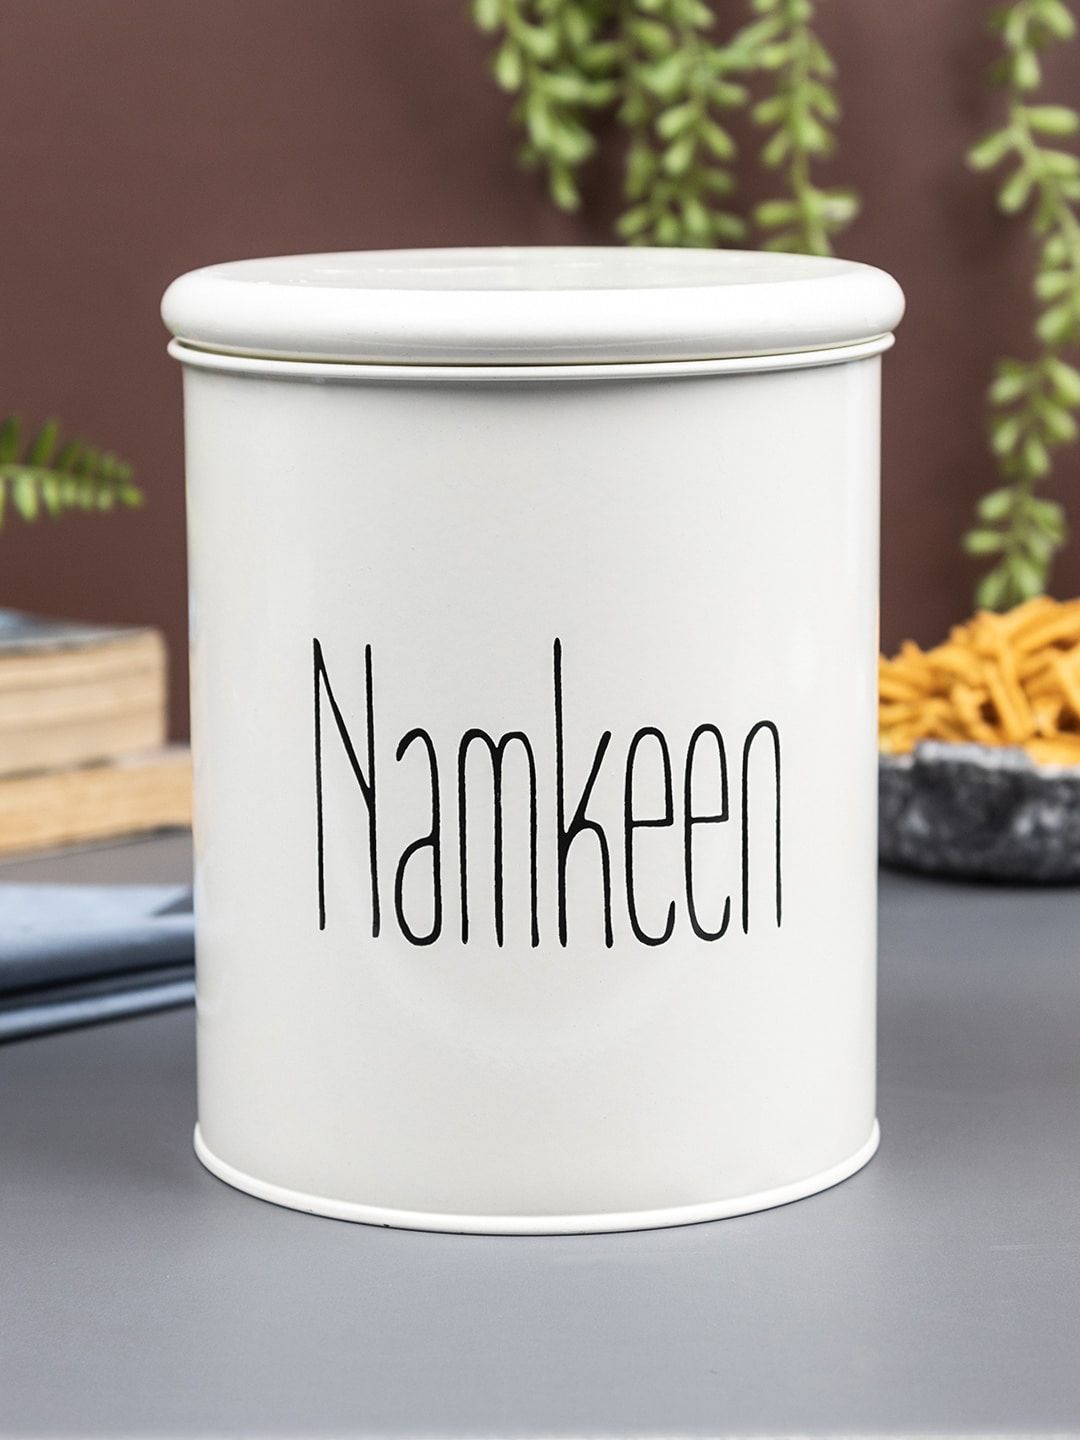 MARKET99 Off White Metal Namkeen Storage Container Price in India